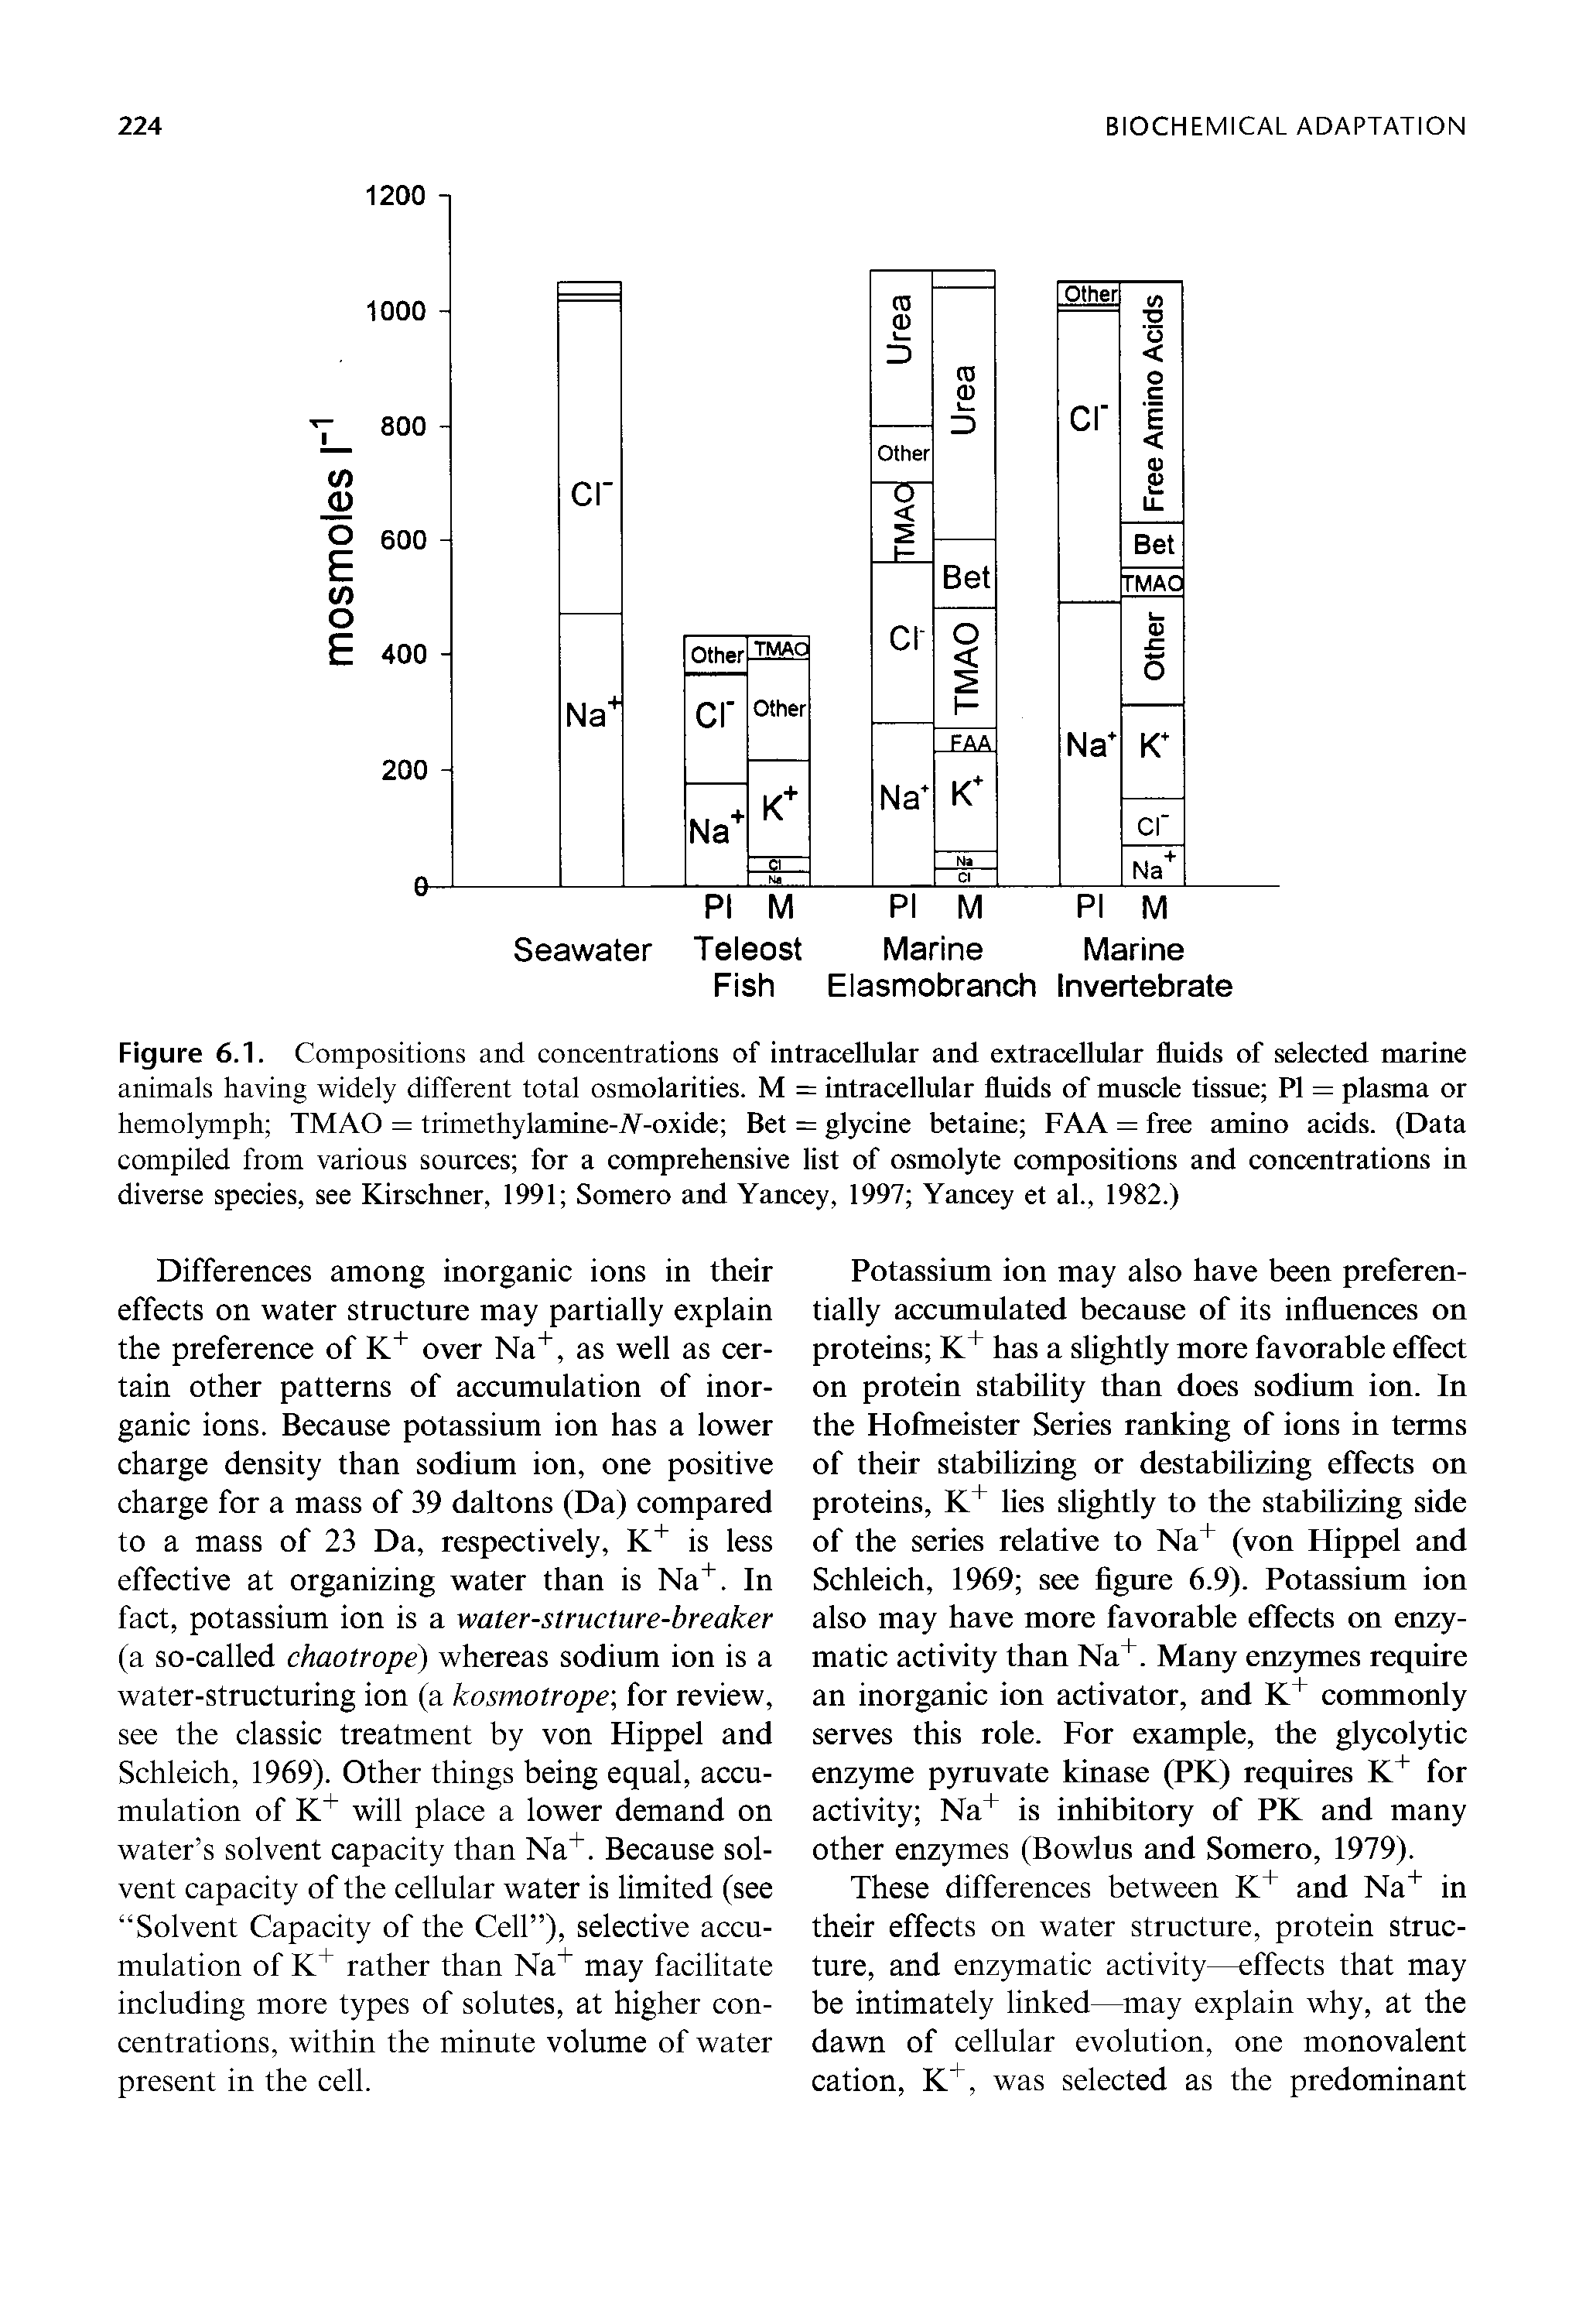 Figure 6.1. Compositions and concentrations of intracellular and extracellular fluids of selected marine animals having widely different total osmolarities. M = intracellular fluids of muscle tissue PI = plasma or hemolymph TMAO = trimethylamine-A-oxide Bet = glycine betaine FAA = free amino acids. (Data compiled from various sources for a comprehensive list of osmolyte compositions and concentrations in diverse species, see Kirschner, 1991 Somero and Yancey, 1997 Yancey et al., 1982.)...